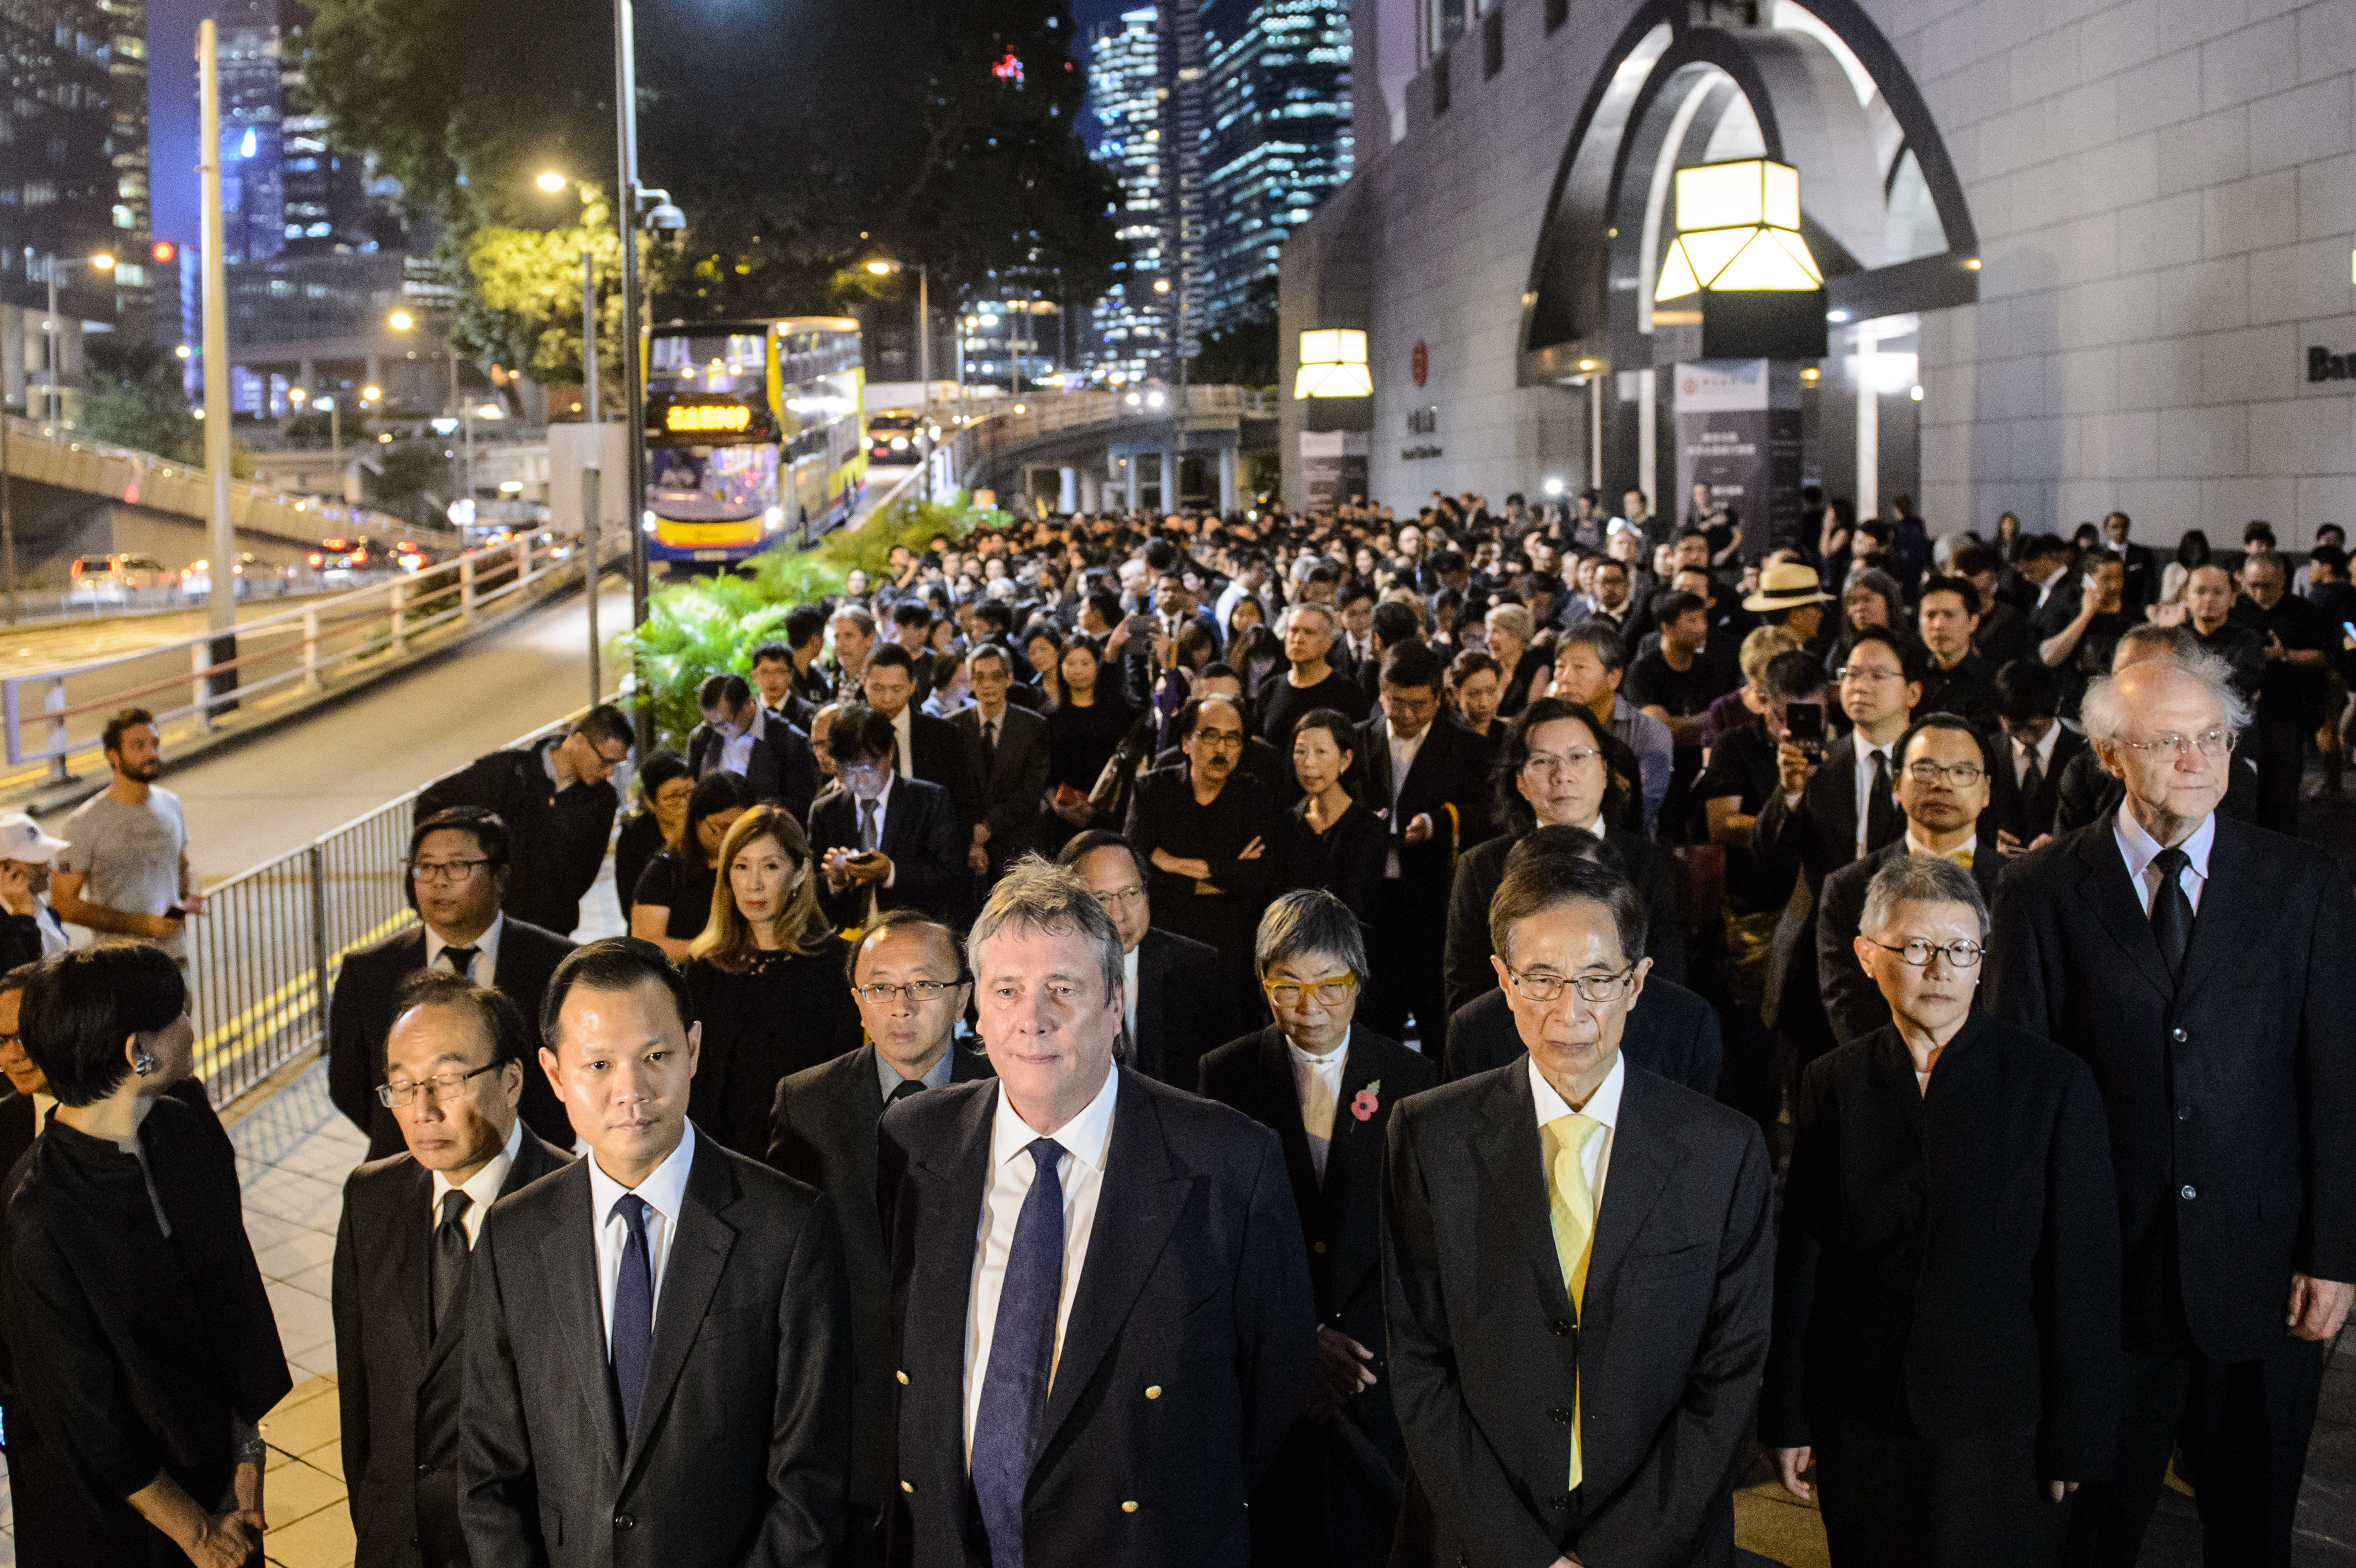 (Front L-R) Members from the legal sector, including former lawmaker Audrey Eu, lawmaker Dennis Kwok, senior counsel Graham Harris, former lawmaker Martin Lee, senior counsel Gladys Li and solicitor John Clancey, join other lawyers and law students in a silent march in protest at a ruling by China which effectively bars two pro-independence legislators from taking office in Hong Kong on November 8, 2016. Hundreds of lawyers and law students, all dressed in black, marched silently through Hong Kong on November 8 in protest at a ruling by China which effectively bars two pro-independence legislators from taking office. / AFP PHOTO / Anthony WALLACE